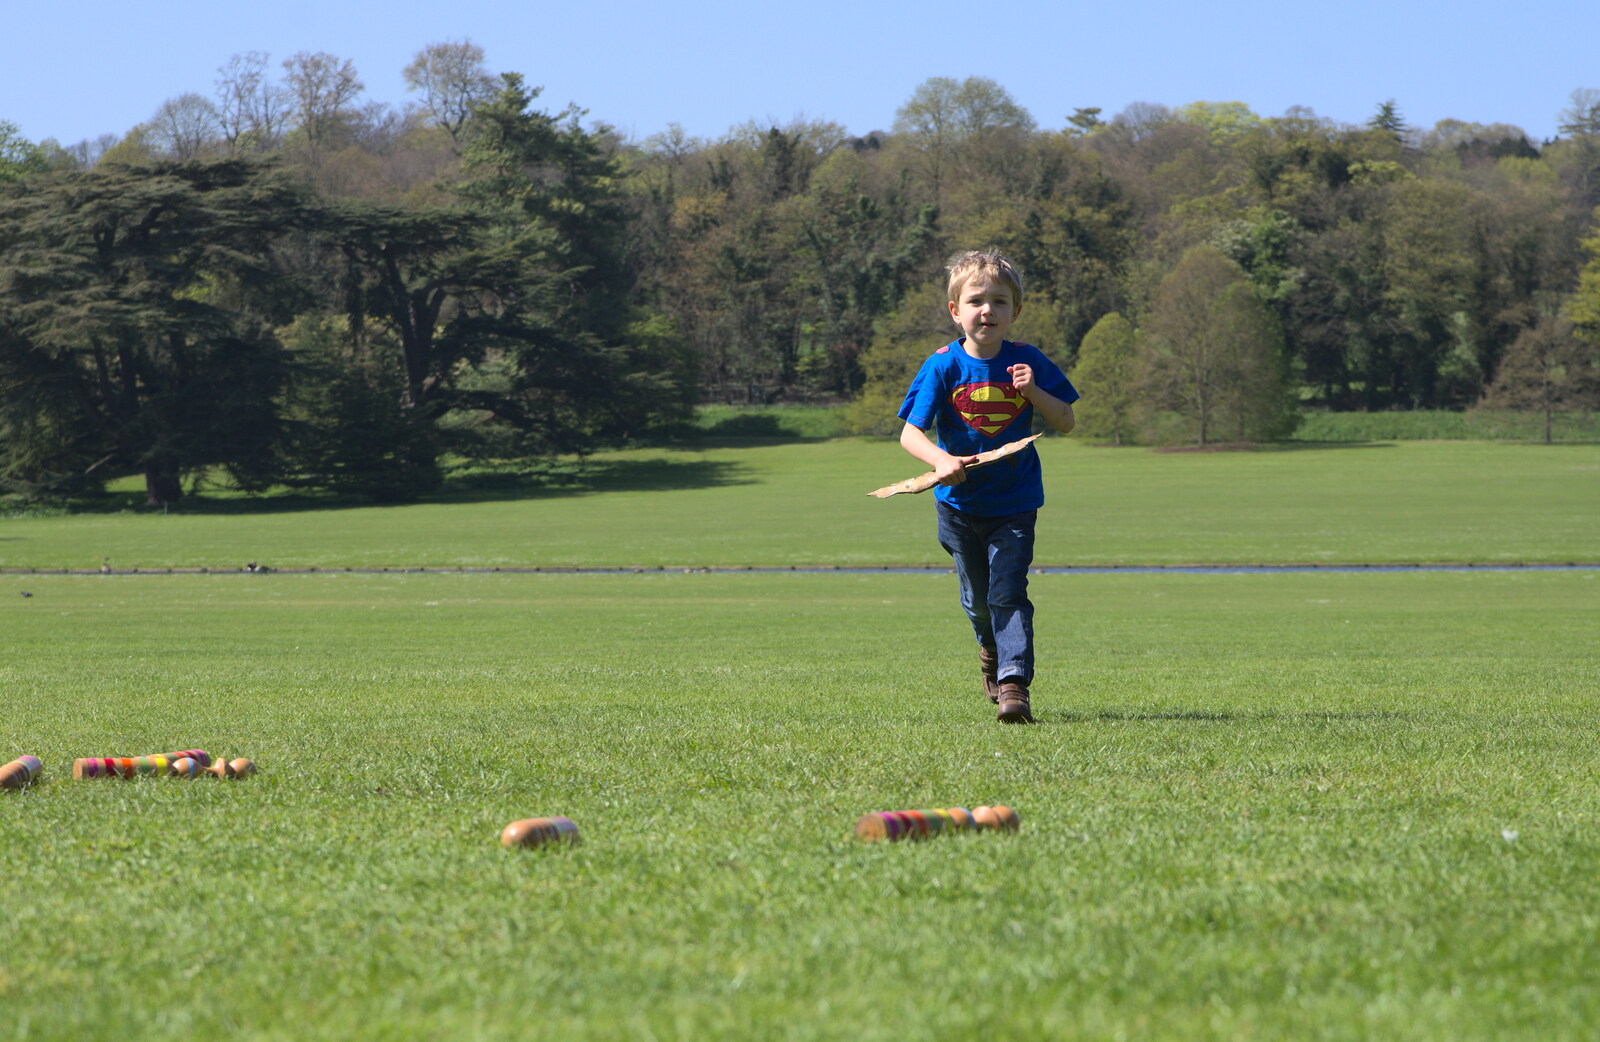 Fred runs around from A Trip to Audley End House, Saffron Walden, Essex - 16th April 2014